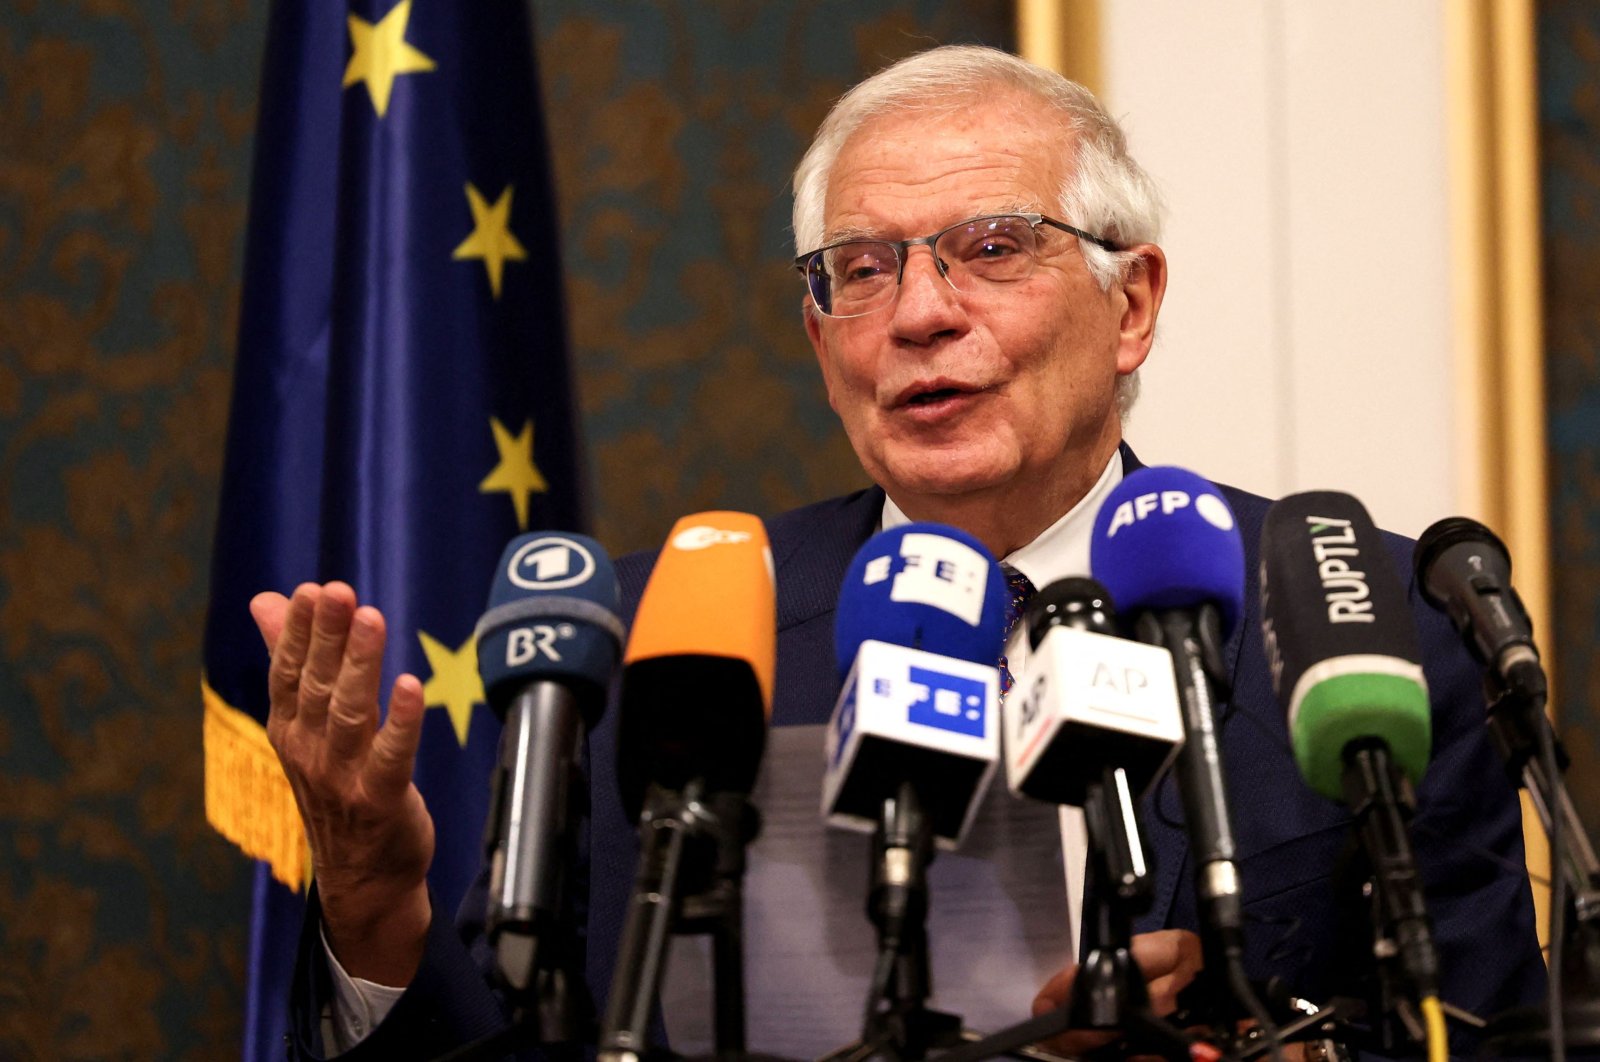 High Representative of the EU for Foreign Affairs and Security Policy Josep Borrell gives a press conference in the capital Tehran, Iran, June 25, 2022. (AFP Photo)